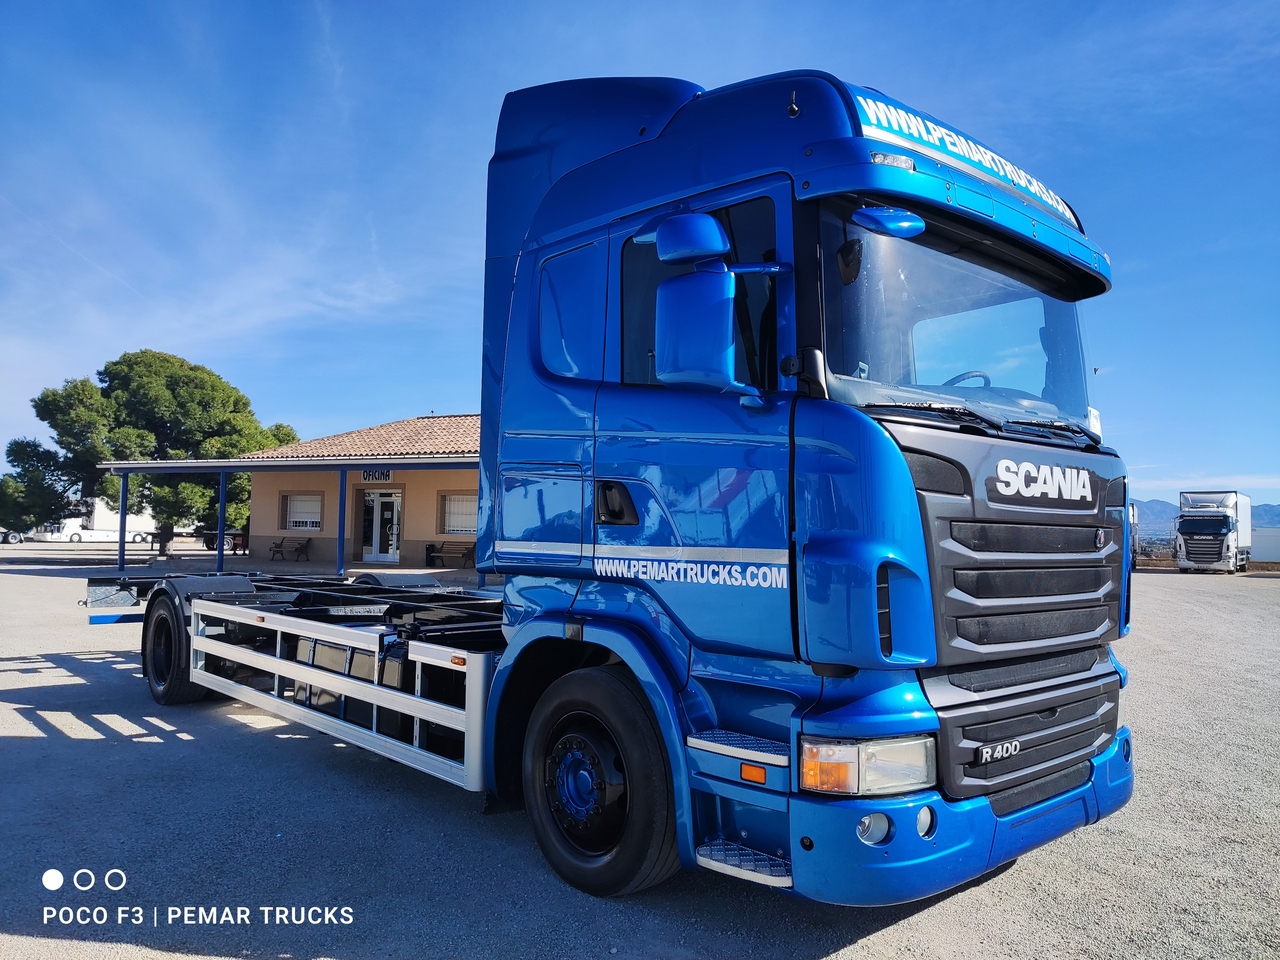 Châssis cabine SCANIA R 400 CHASIS CAJA INTERCAMBIABLE: photos 3